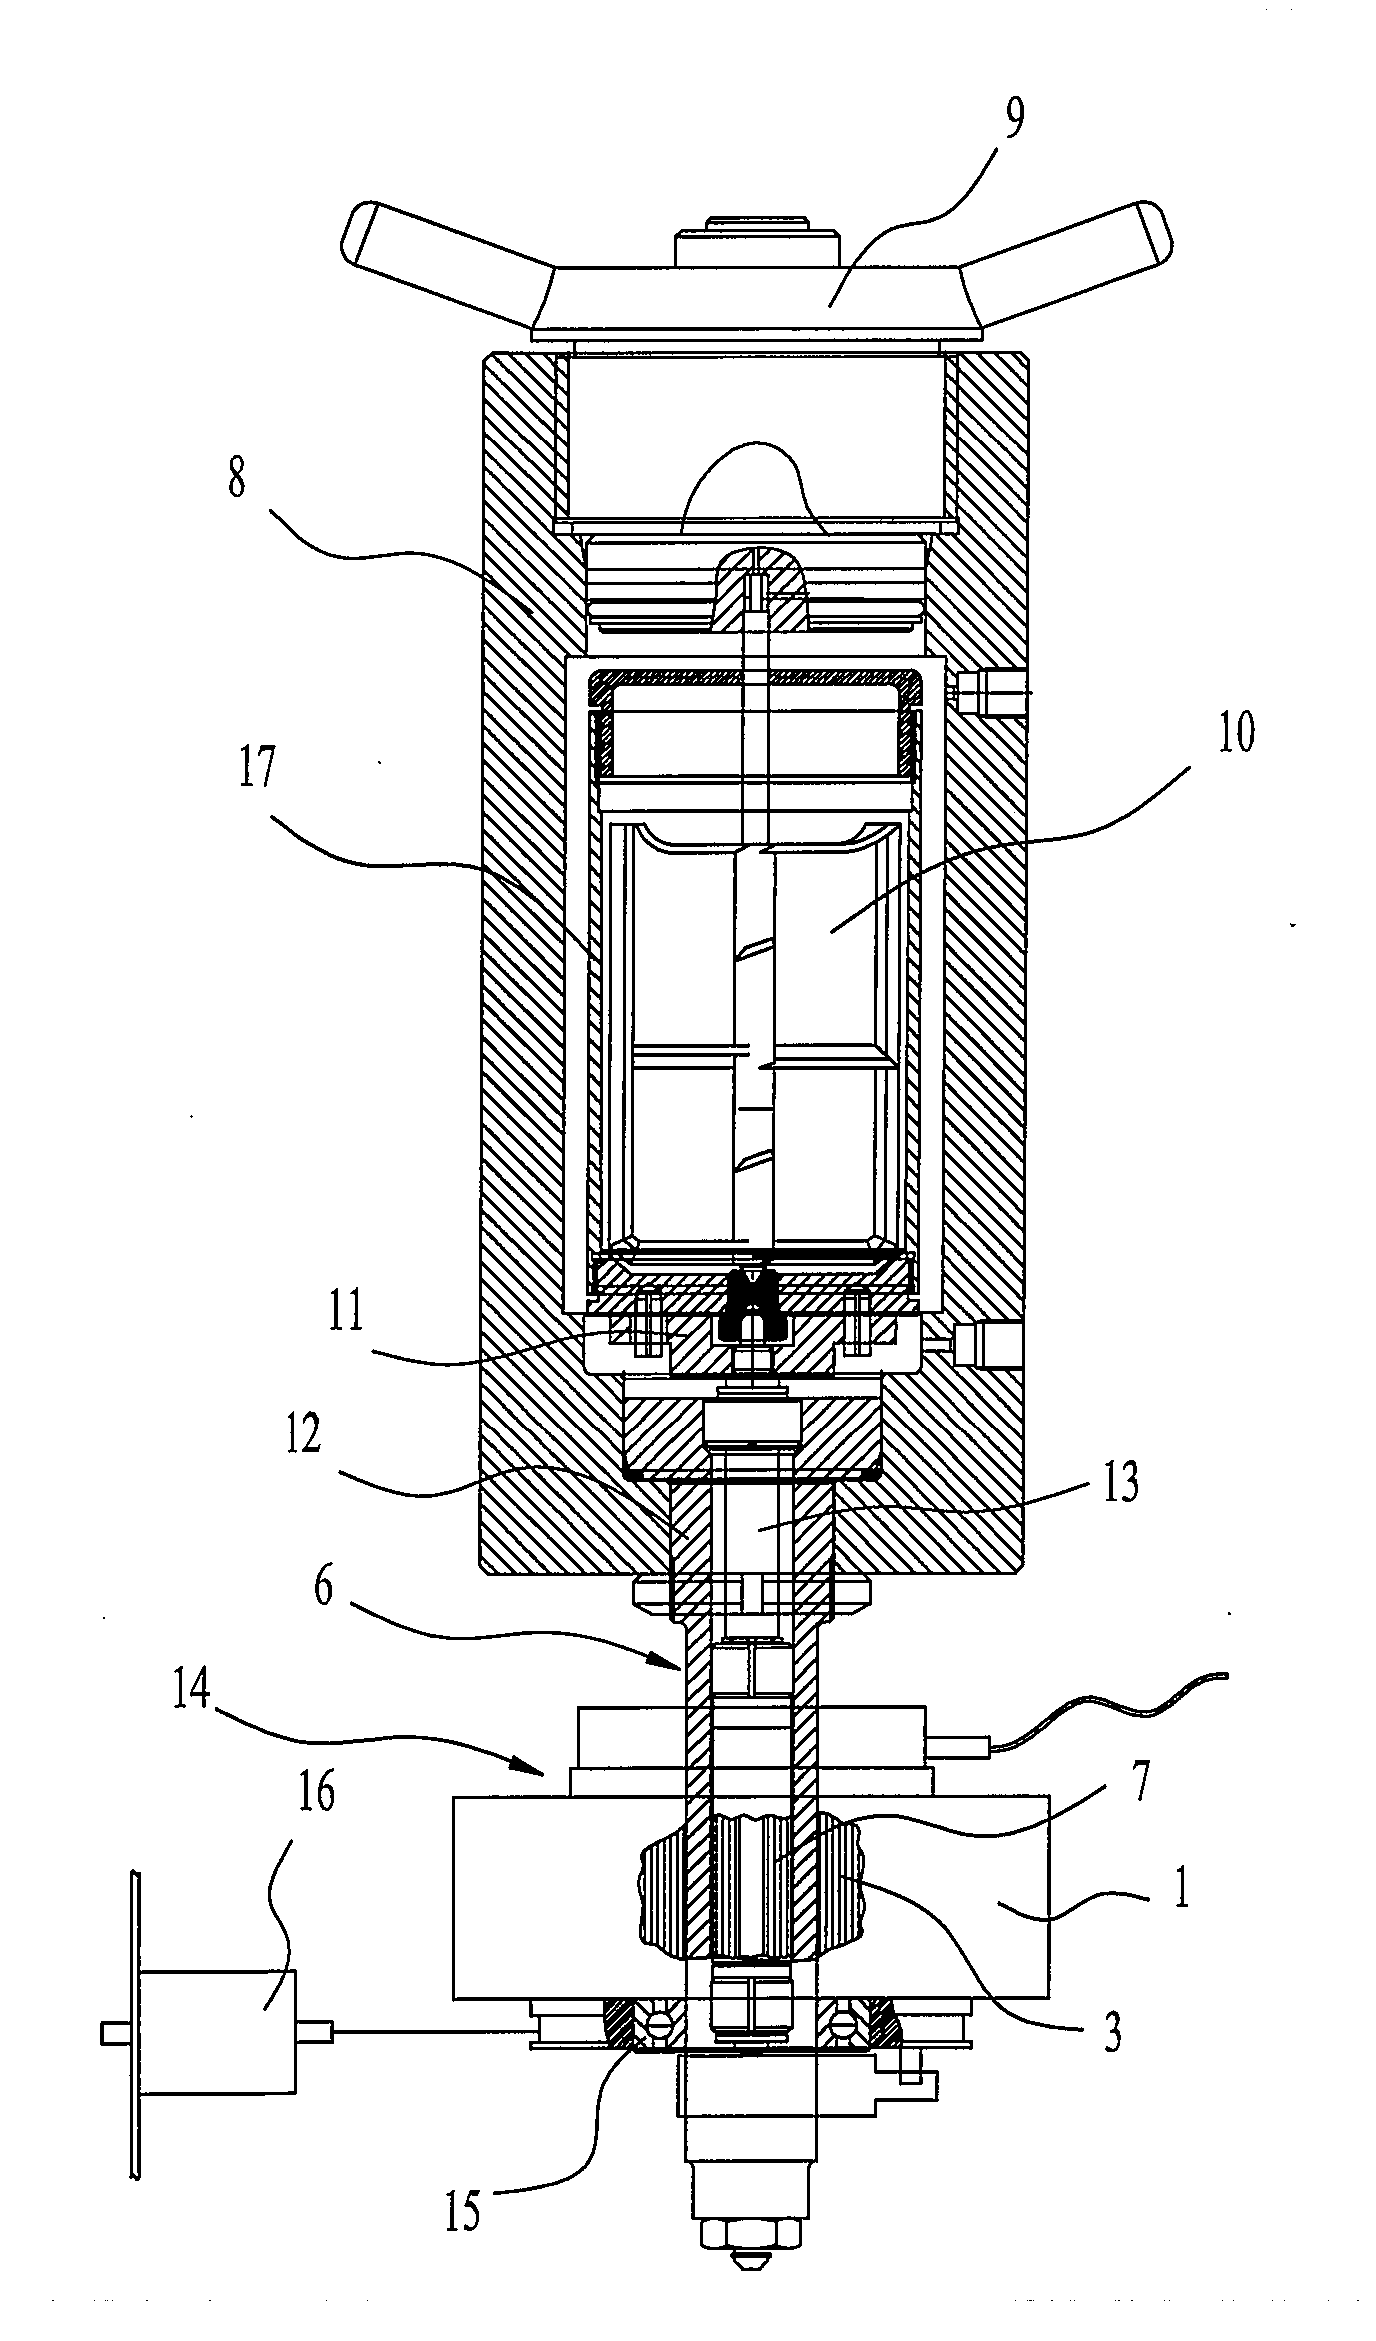 Measuring device for measuring consistency of cement slurry for a consistometer